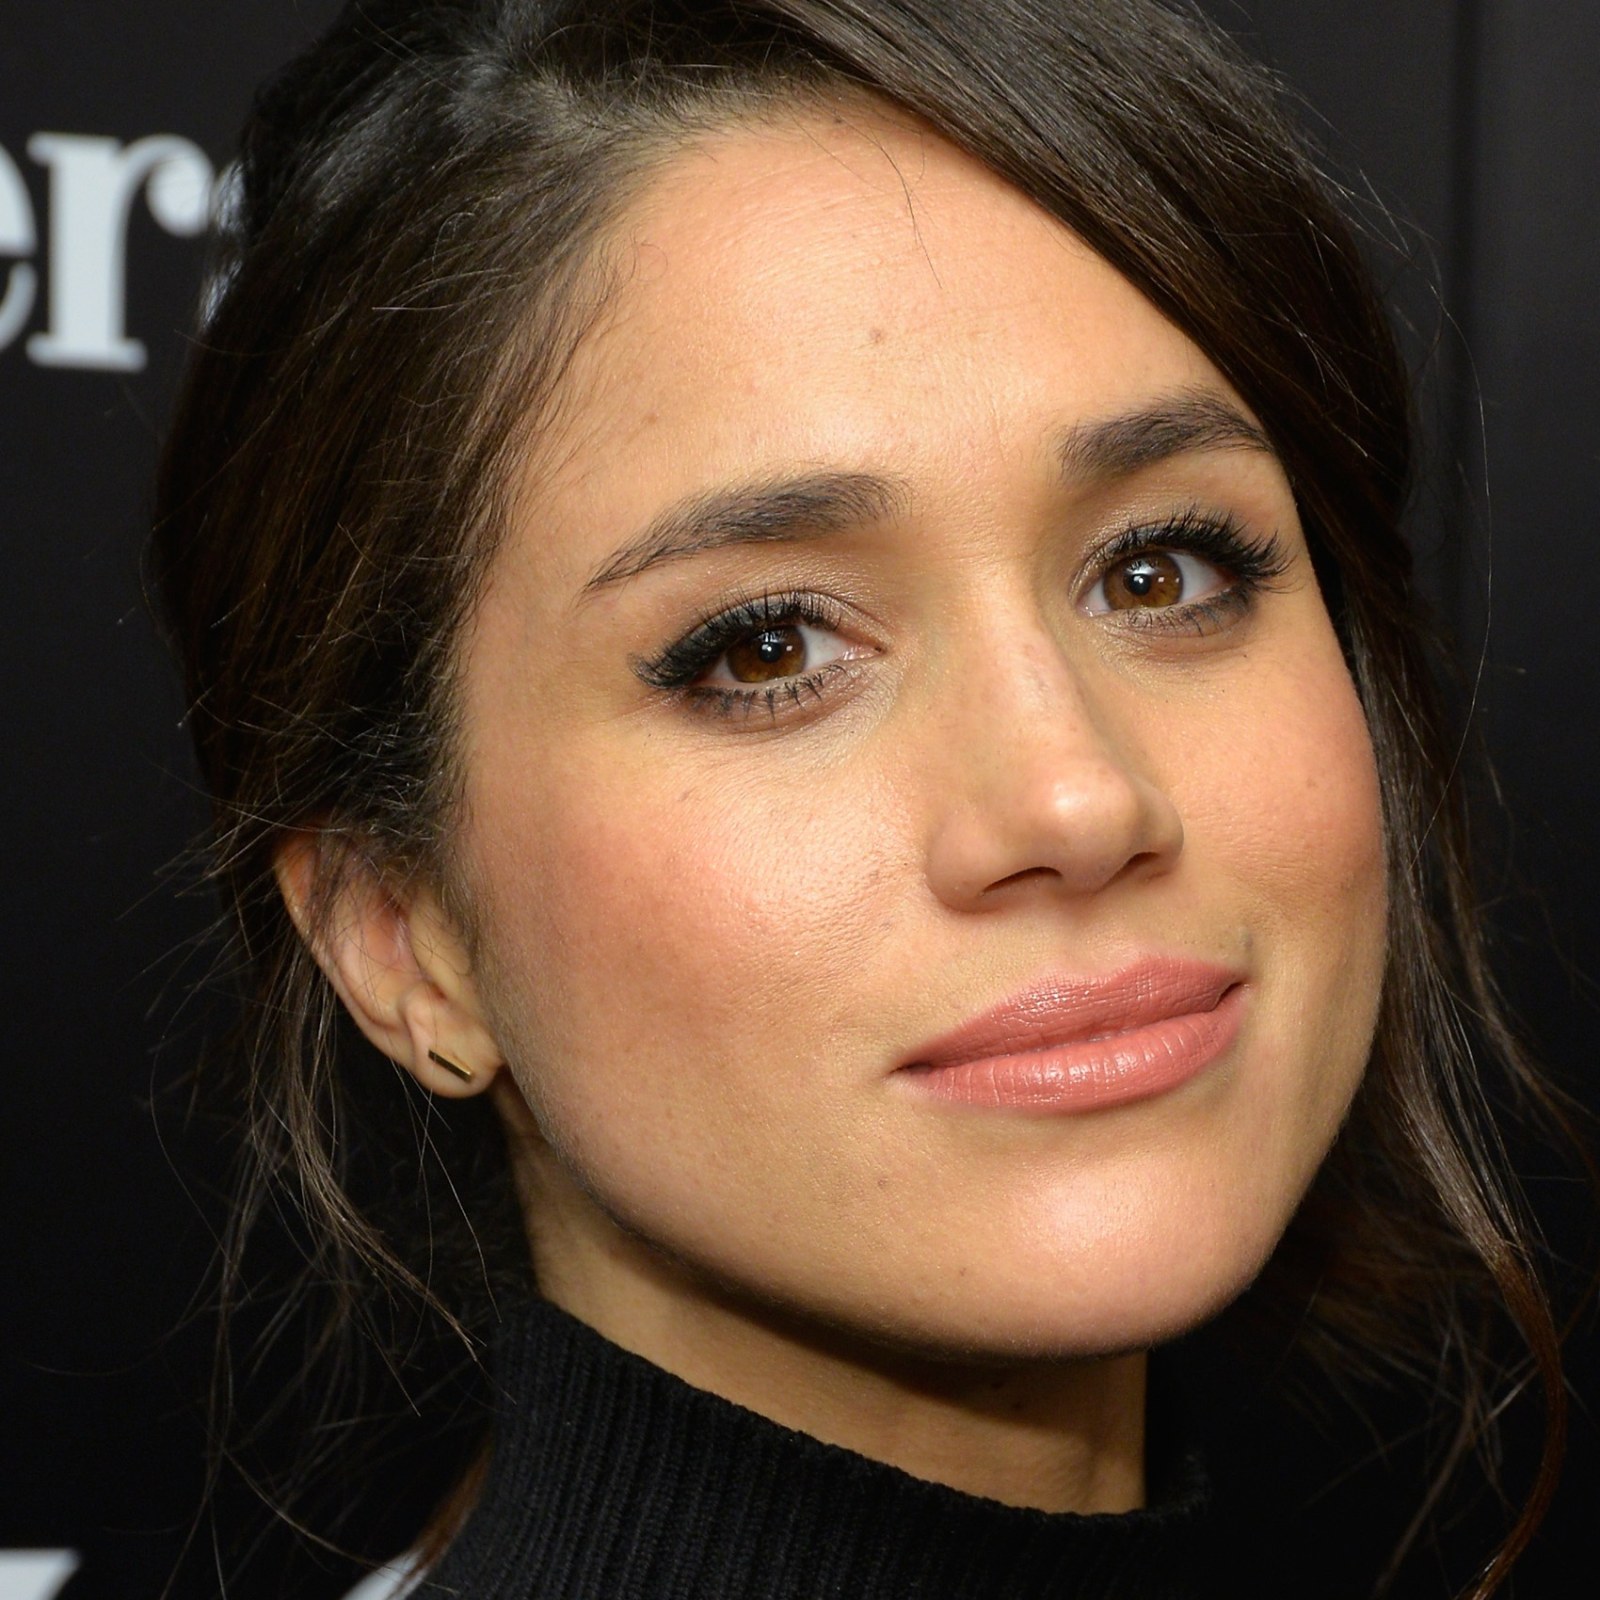 15 TV Shows and Films Meghan Markle Has Appeared In